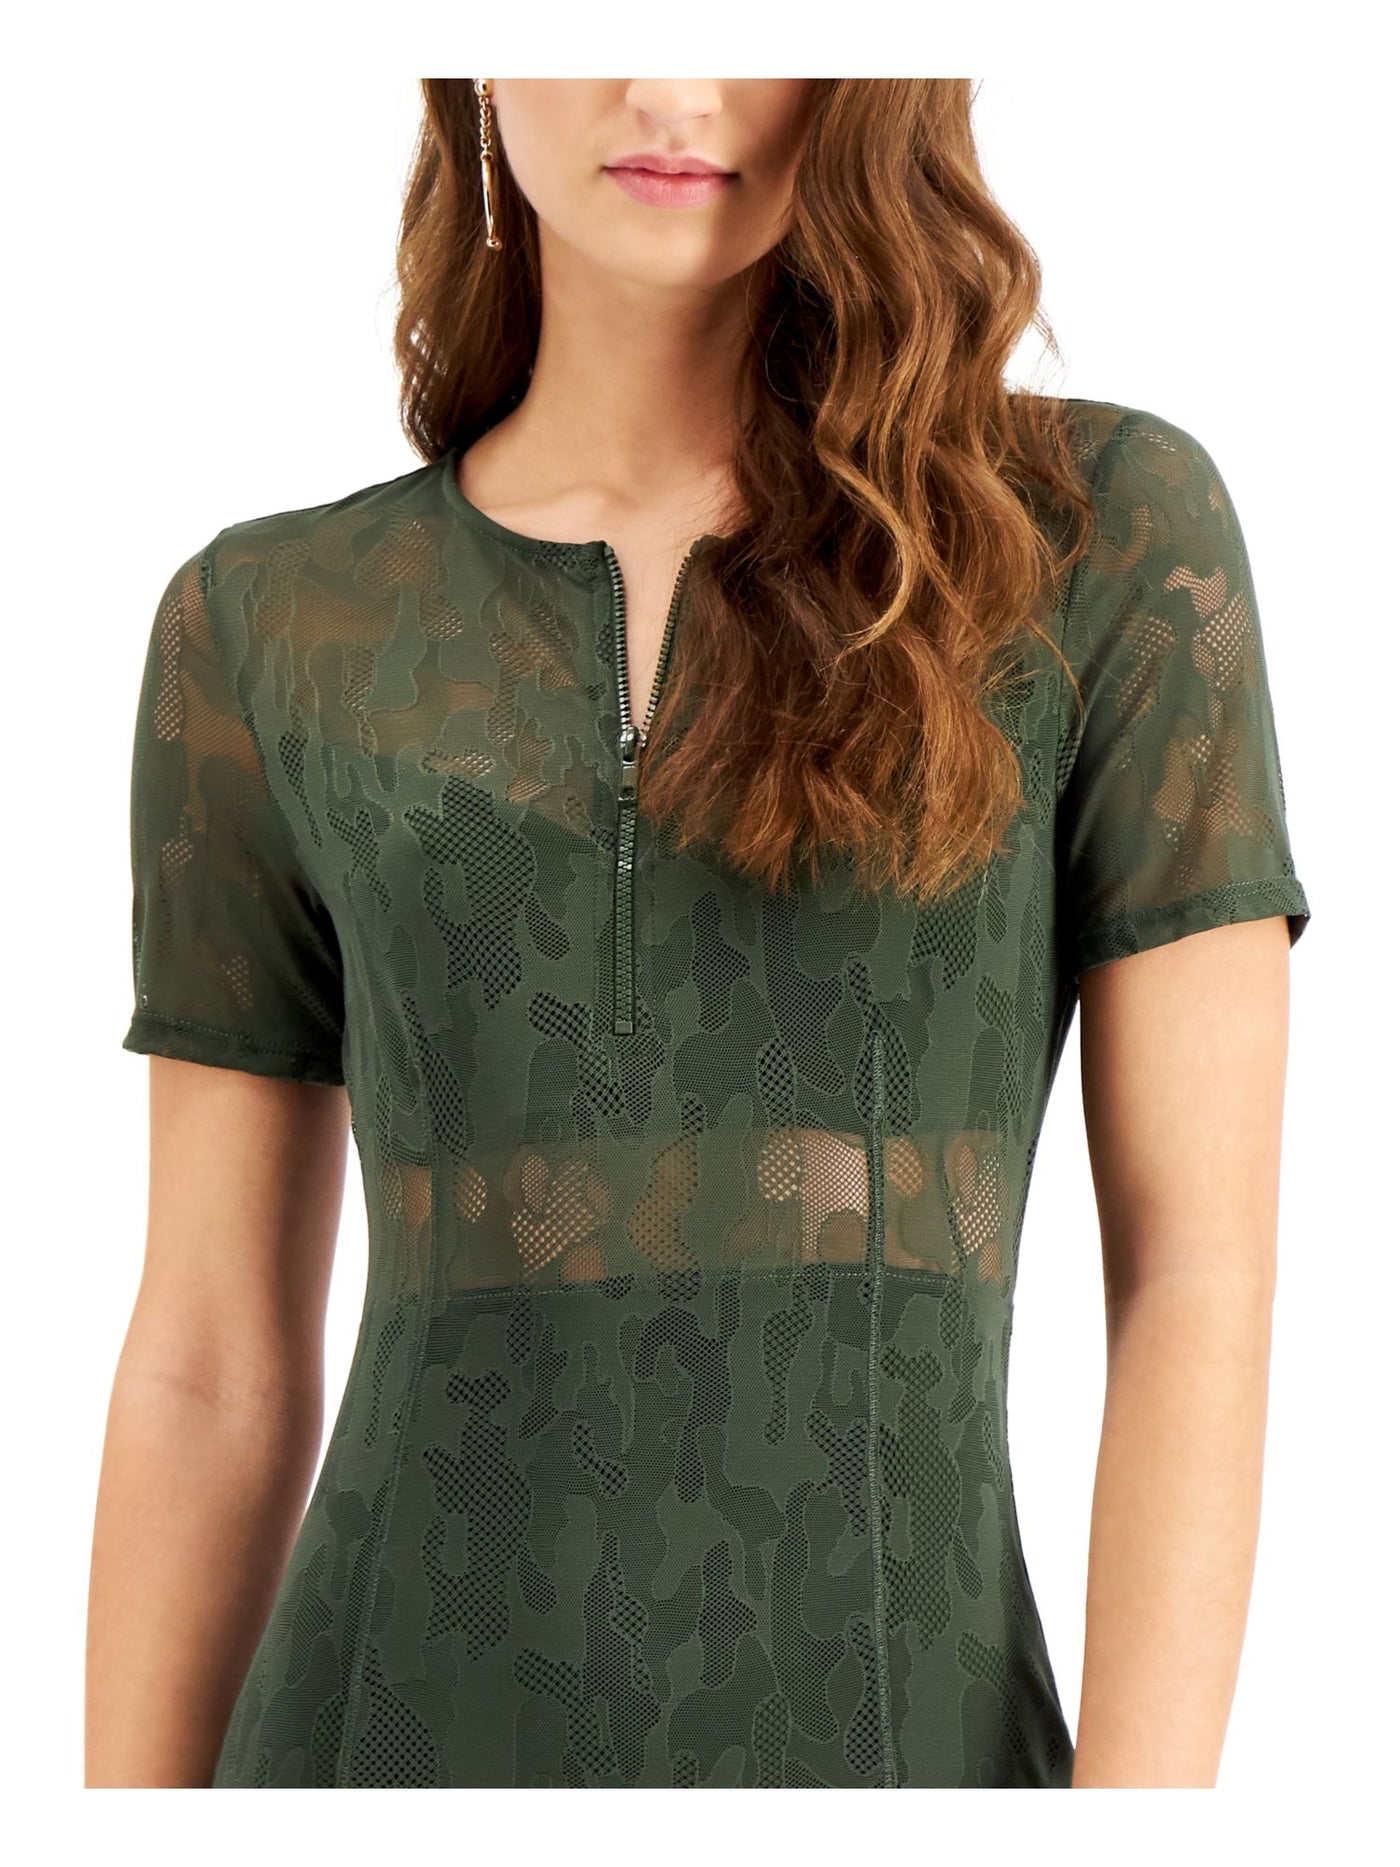 GUESS Womens Green Cut Out Zippered Mesh Camouflage Short Sleeve Jewel Neck Mini Party Body Con Dress XS